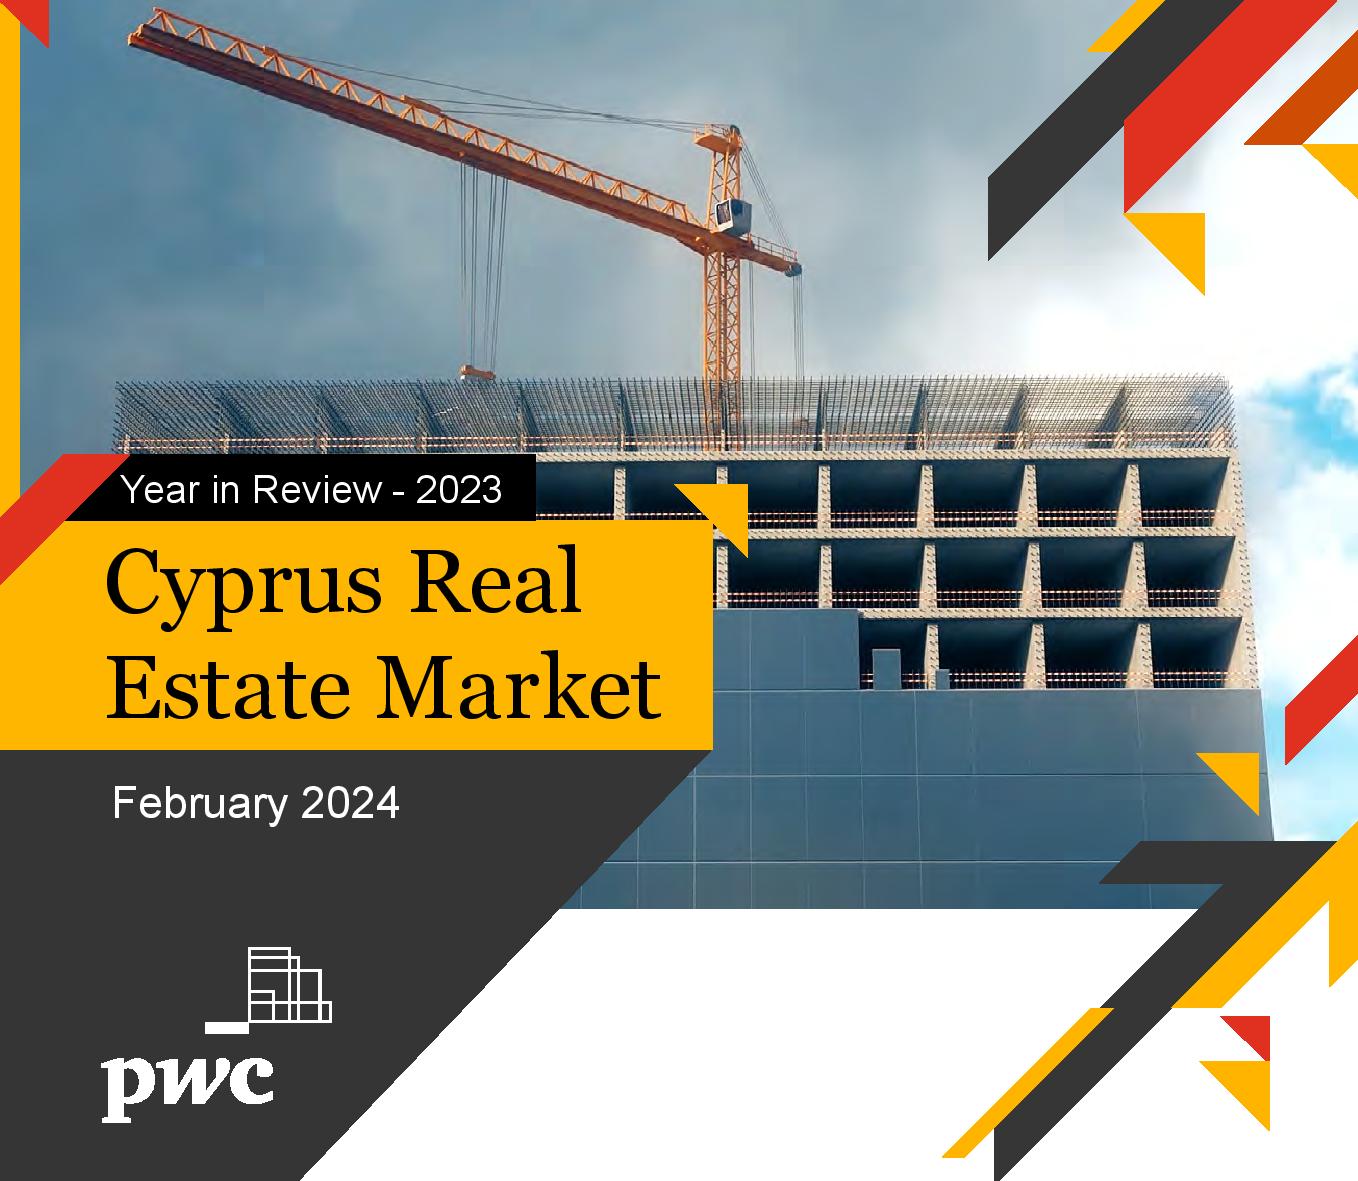 Cyprus Real Estate Market Year in Review 2023